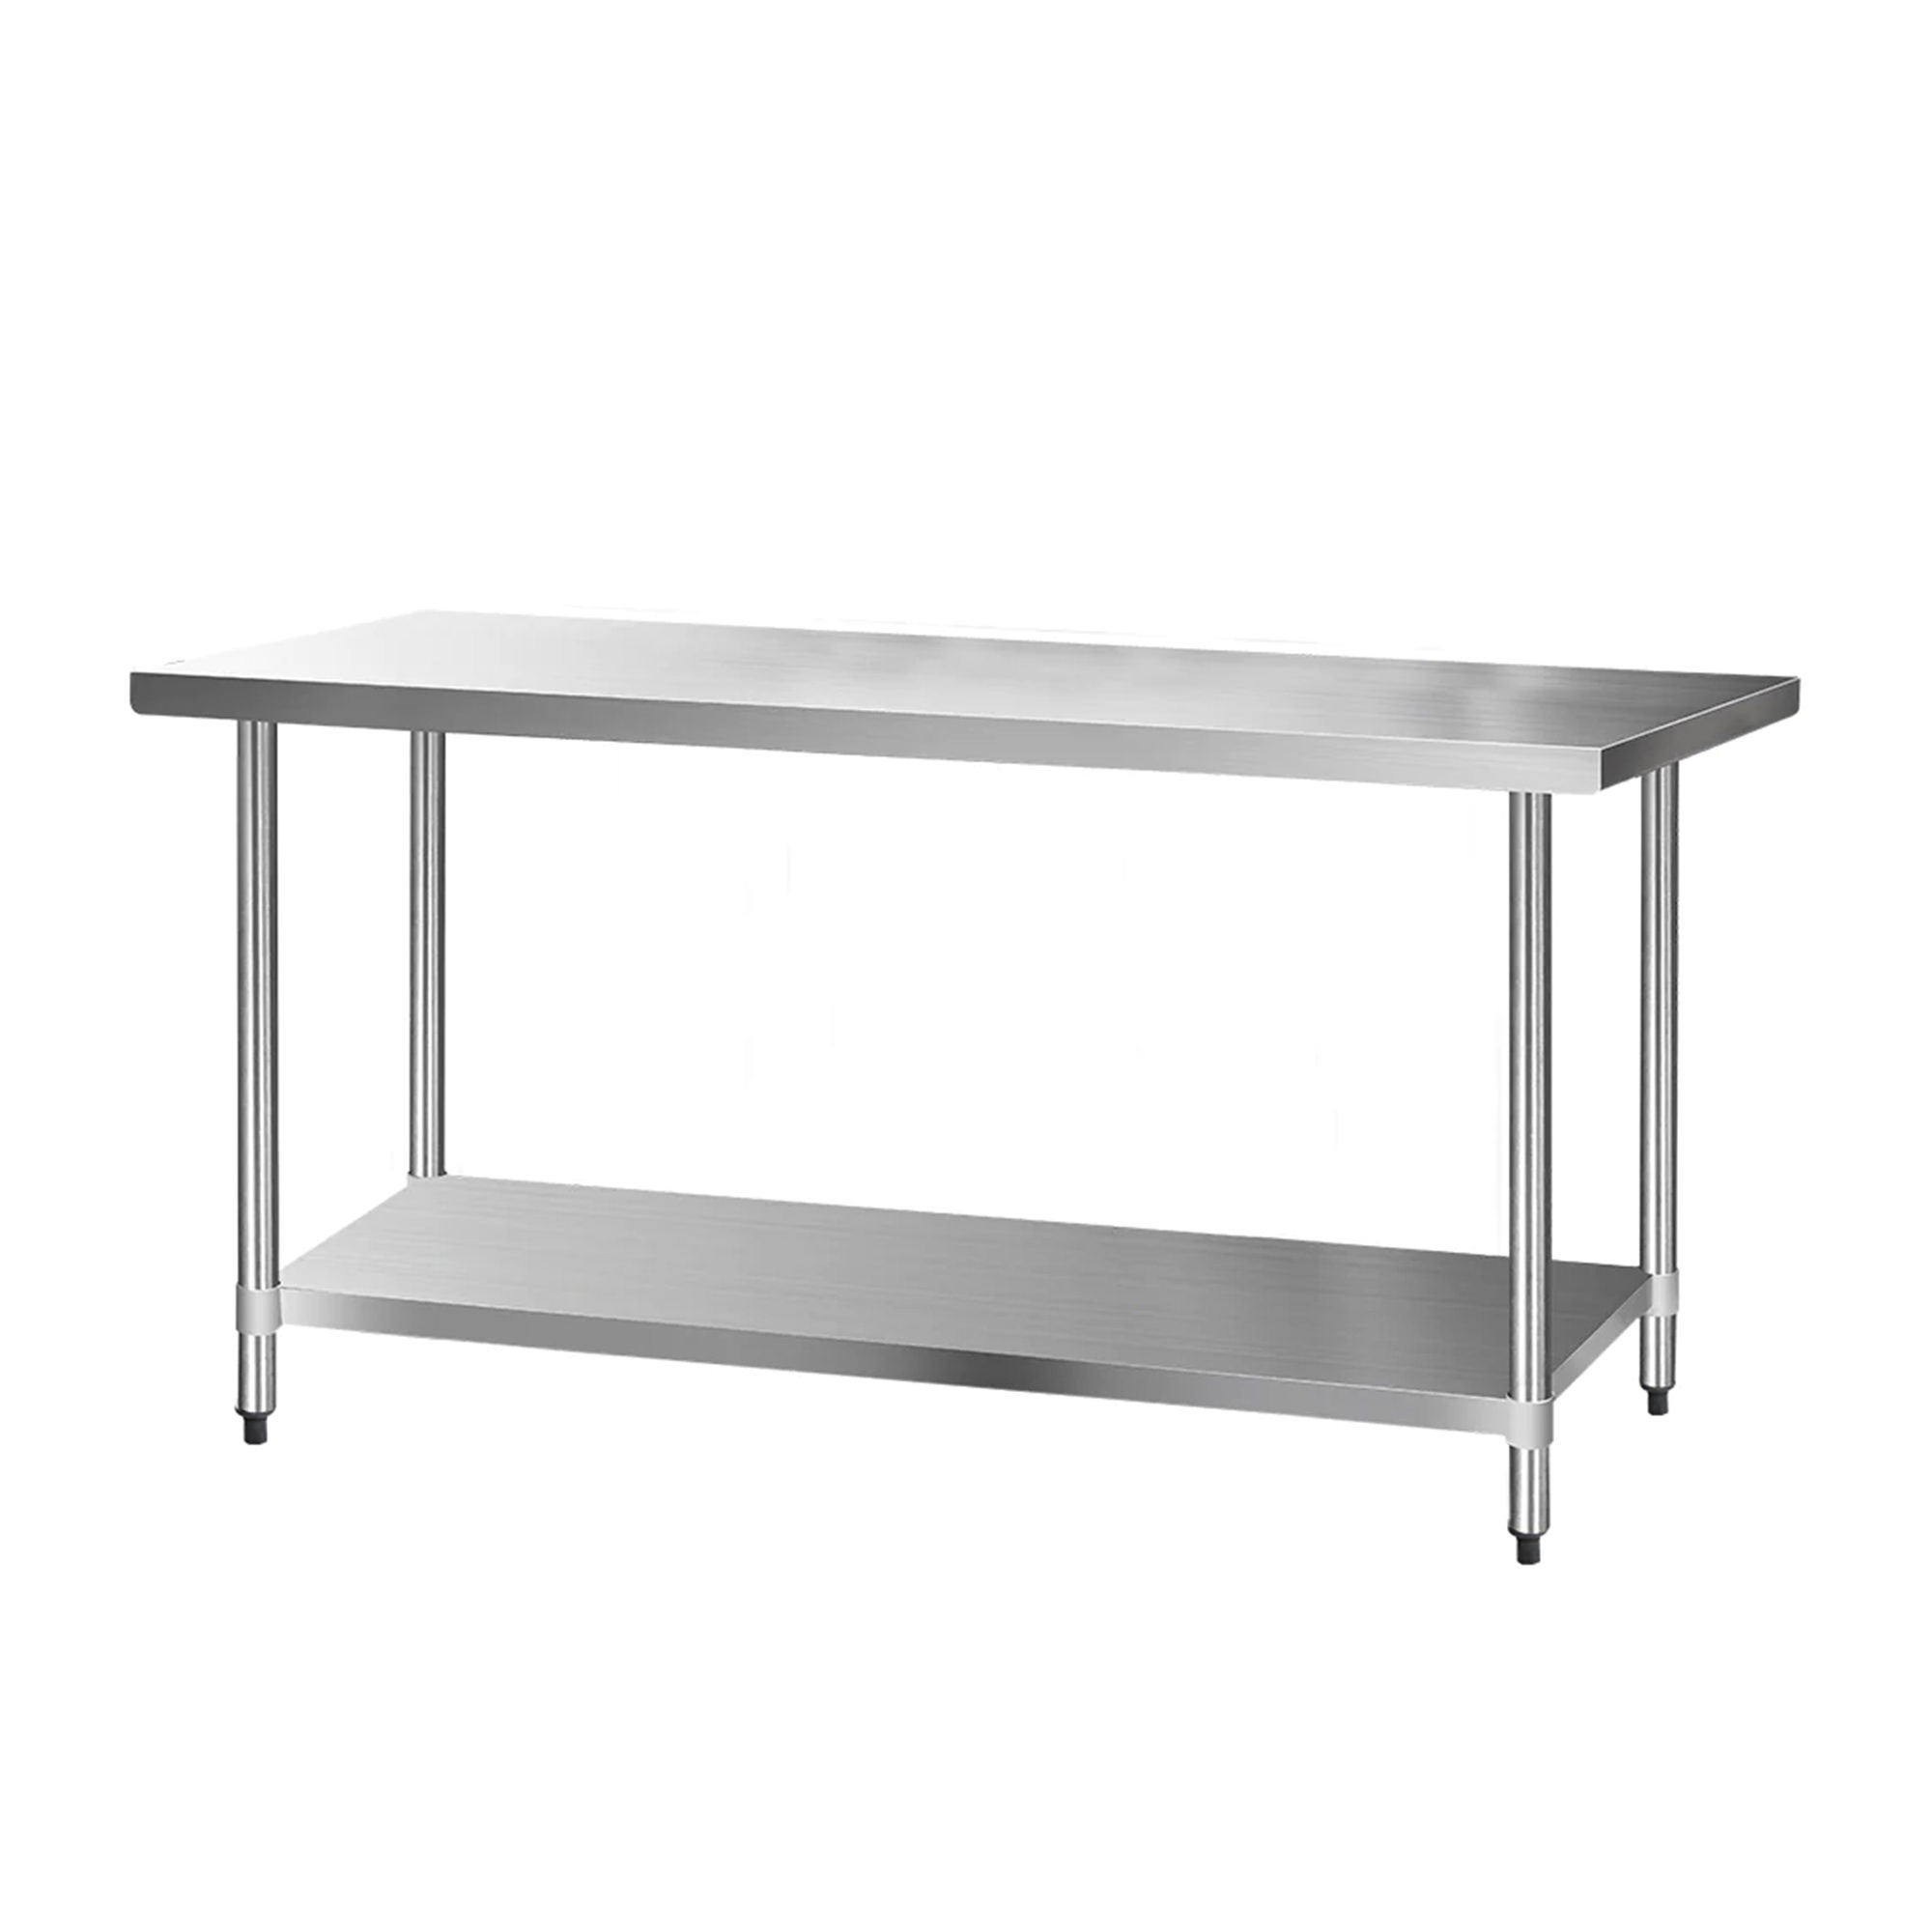 Cefito 430 Stainless Steel Kitchen Bench 182.9x76.2cm Image 1